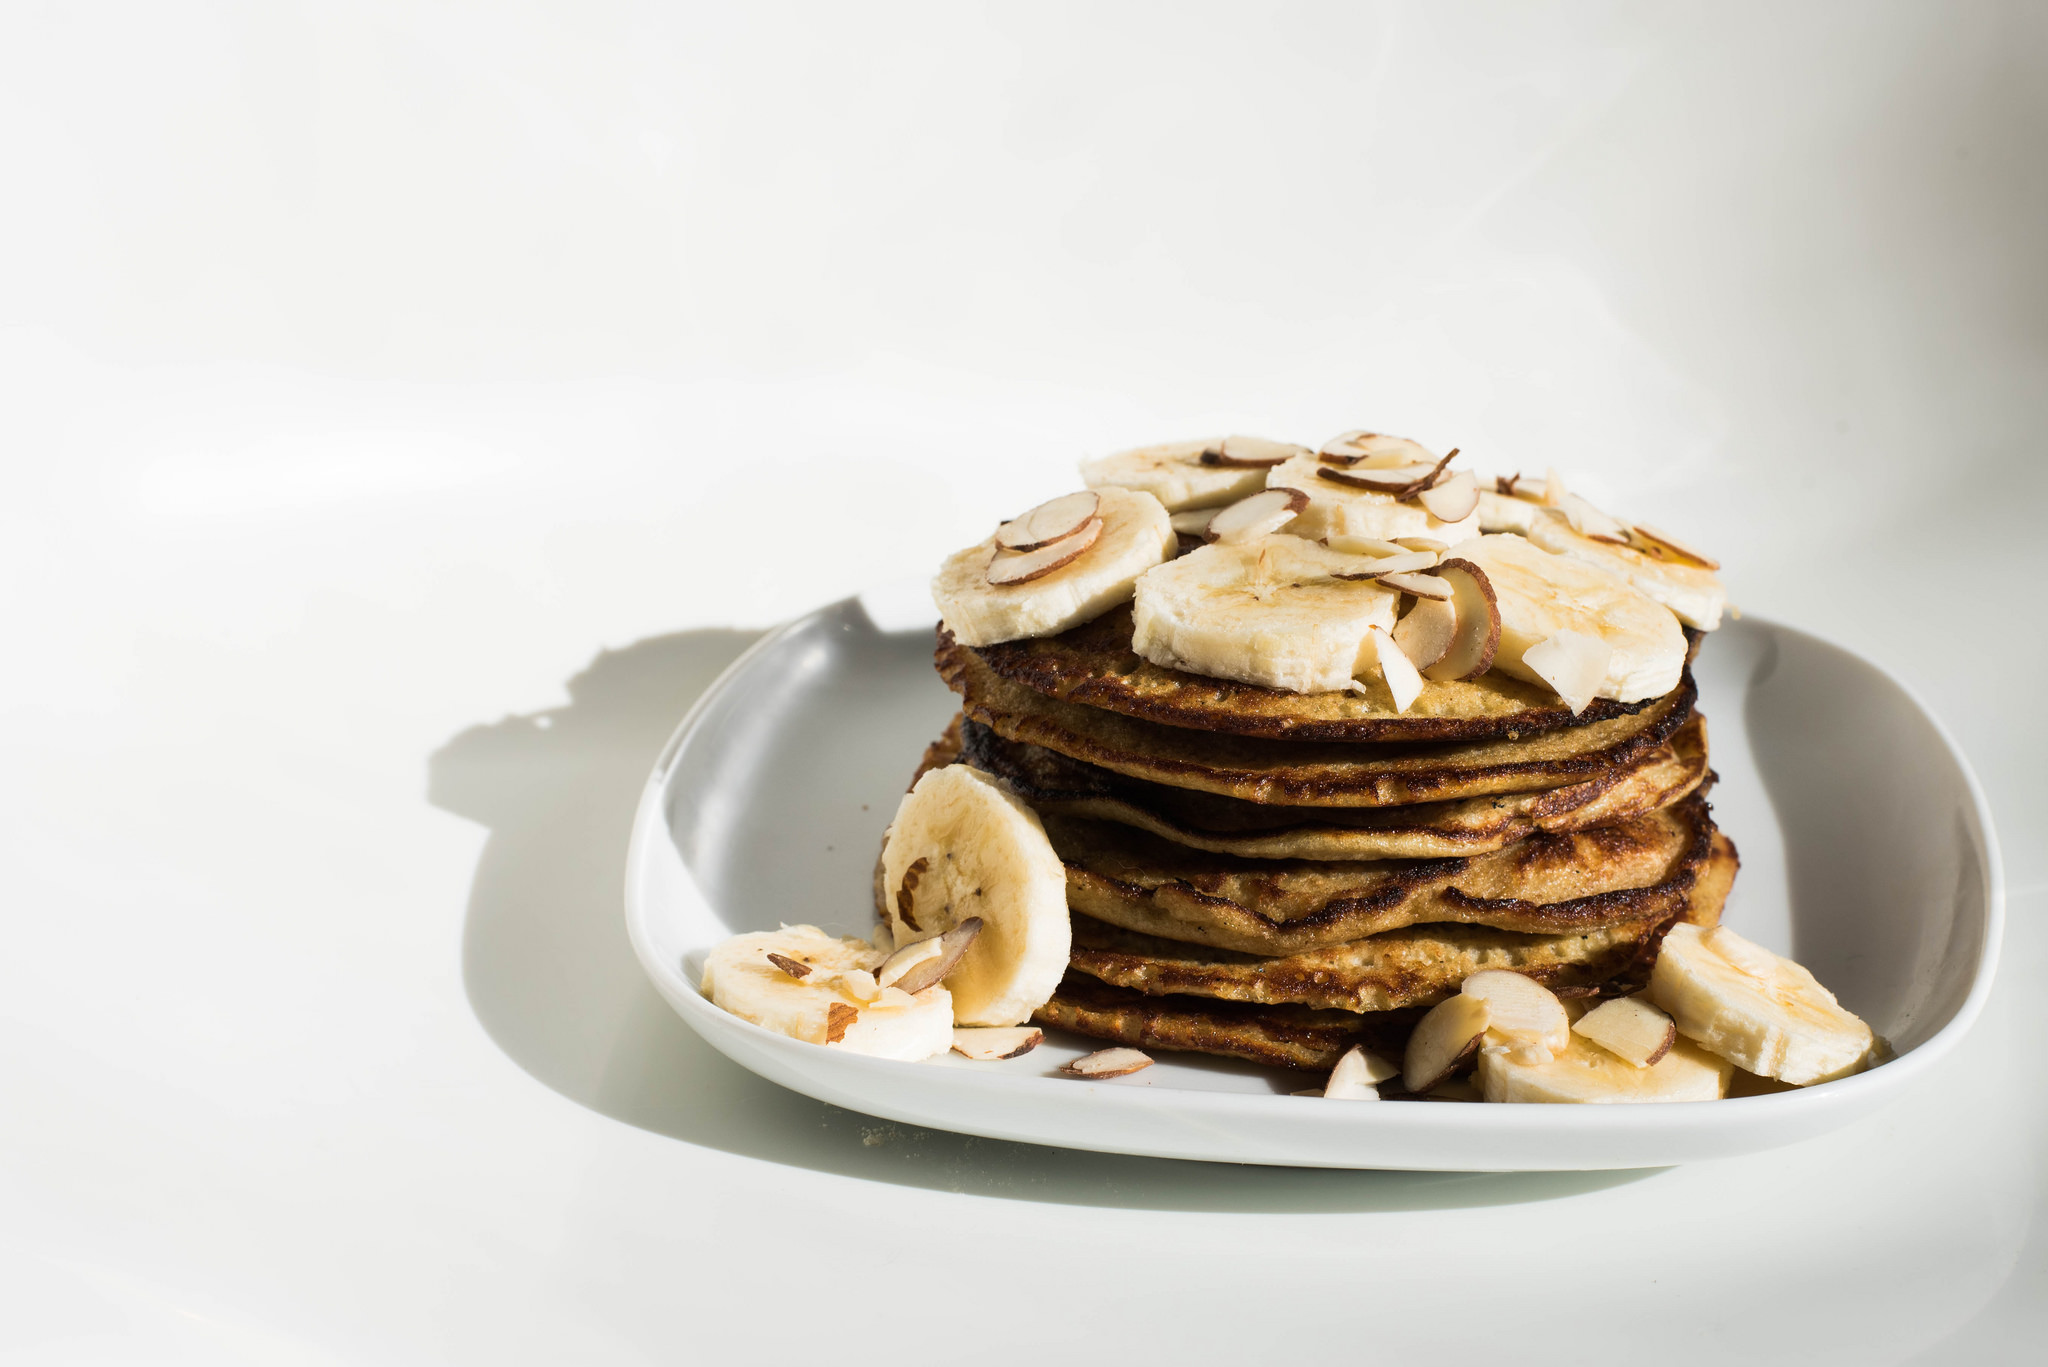 Gluten-Free Banana Pancakes: Only 6 ingredients! Sunday Brunch, here we come!